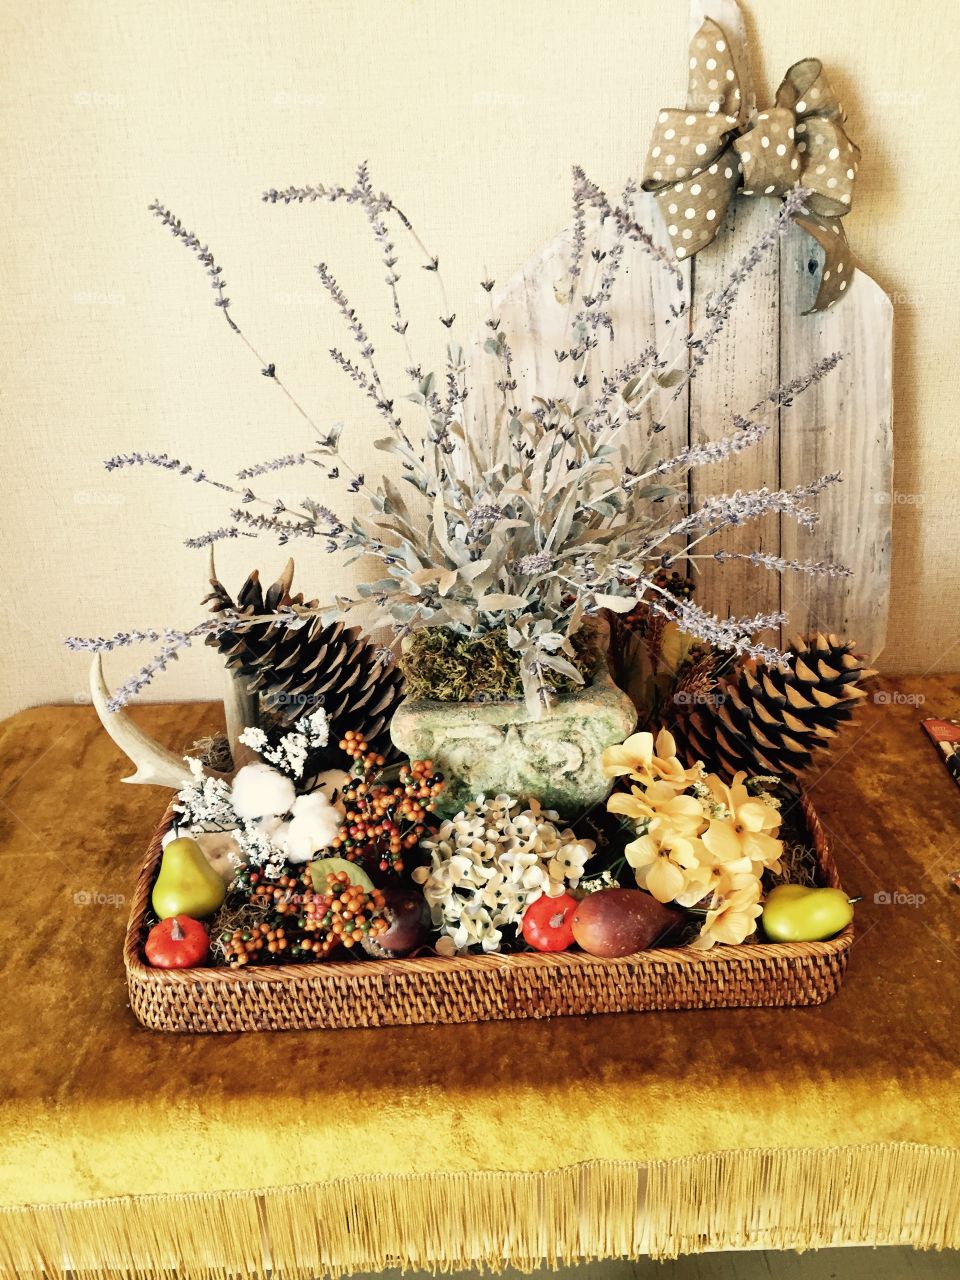 Fall celebration centerpiece with flowers and wicker basket with pine cones, gourds, fall leaves and flowers. 